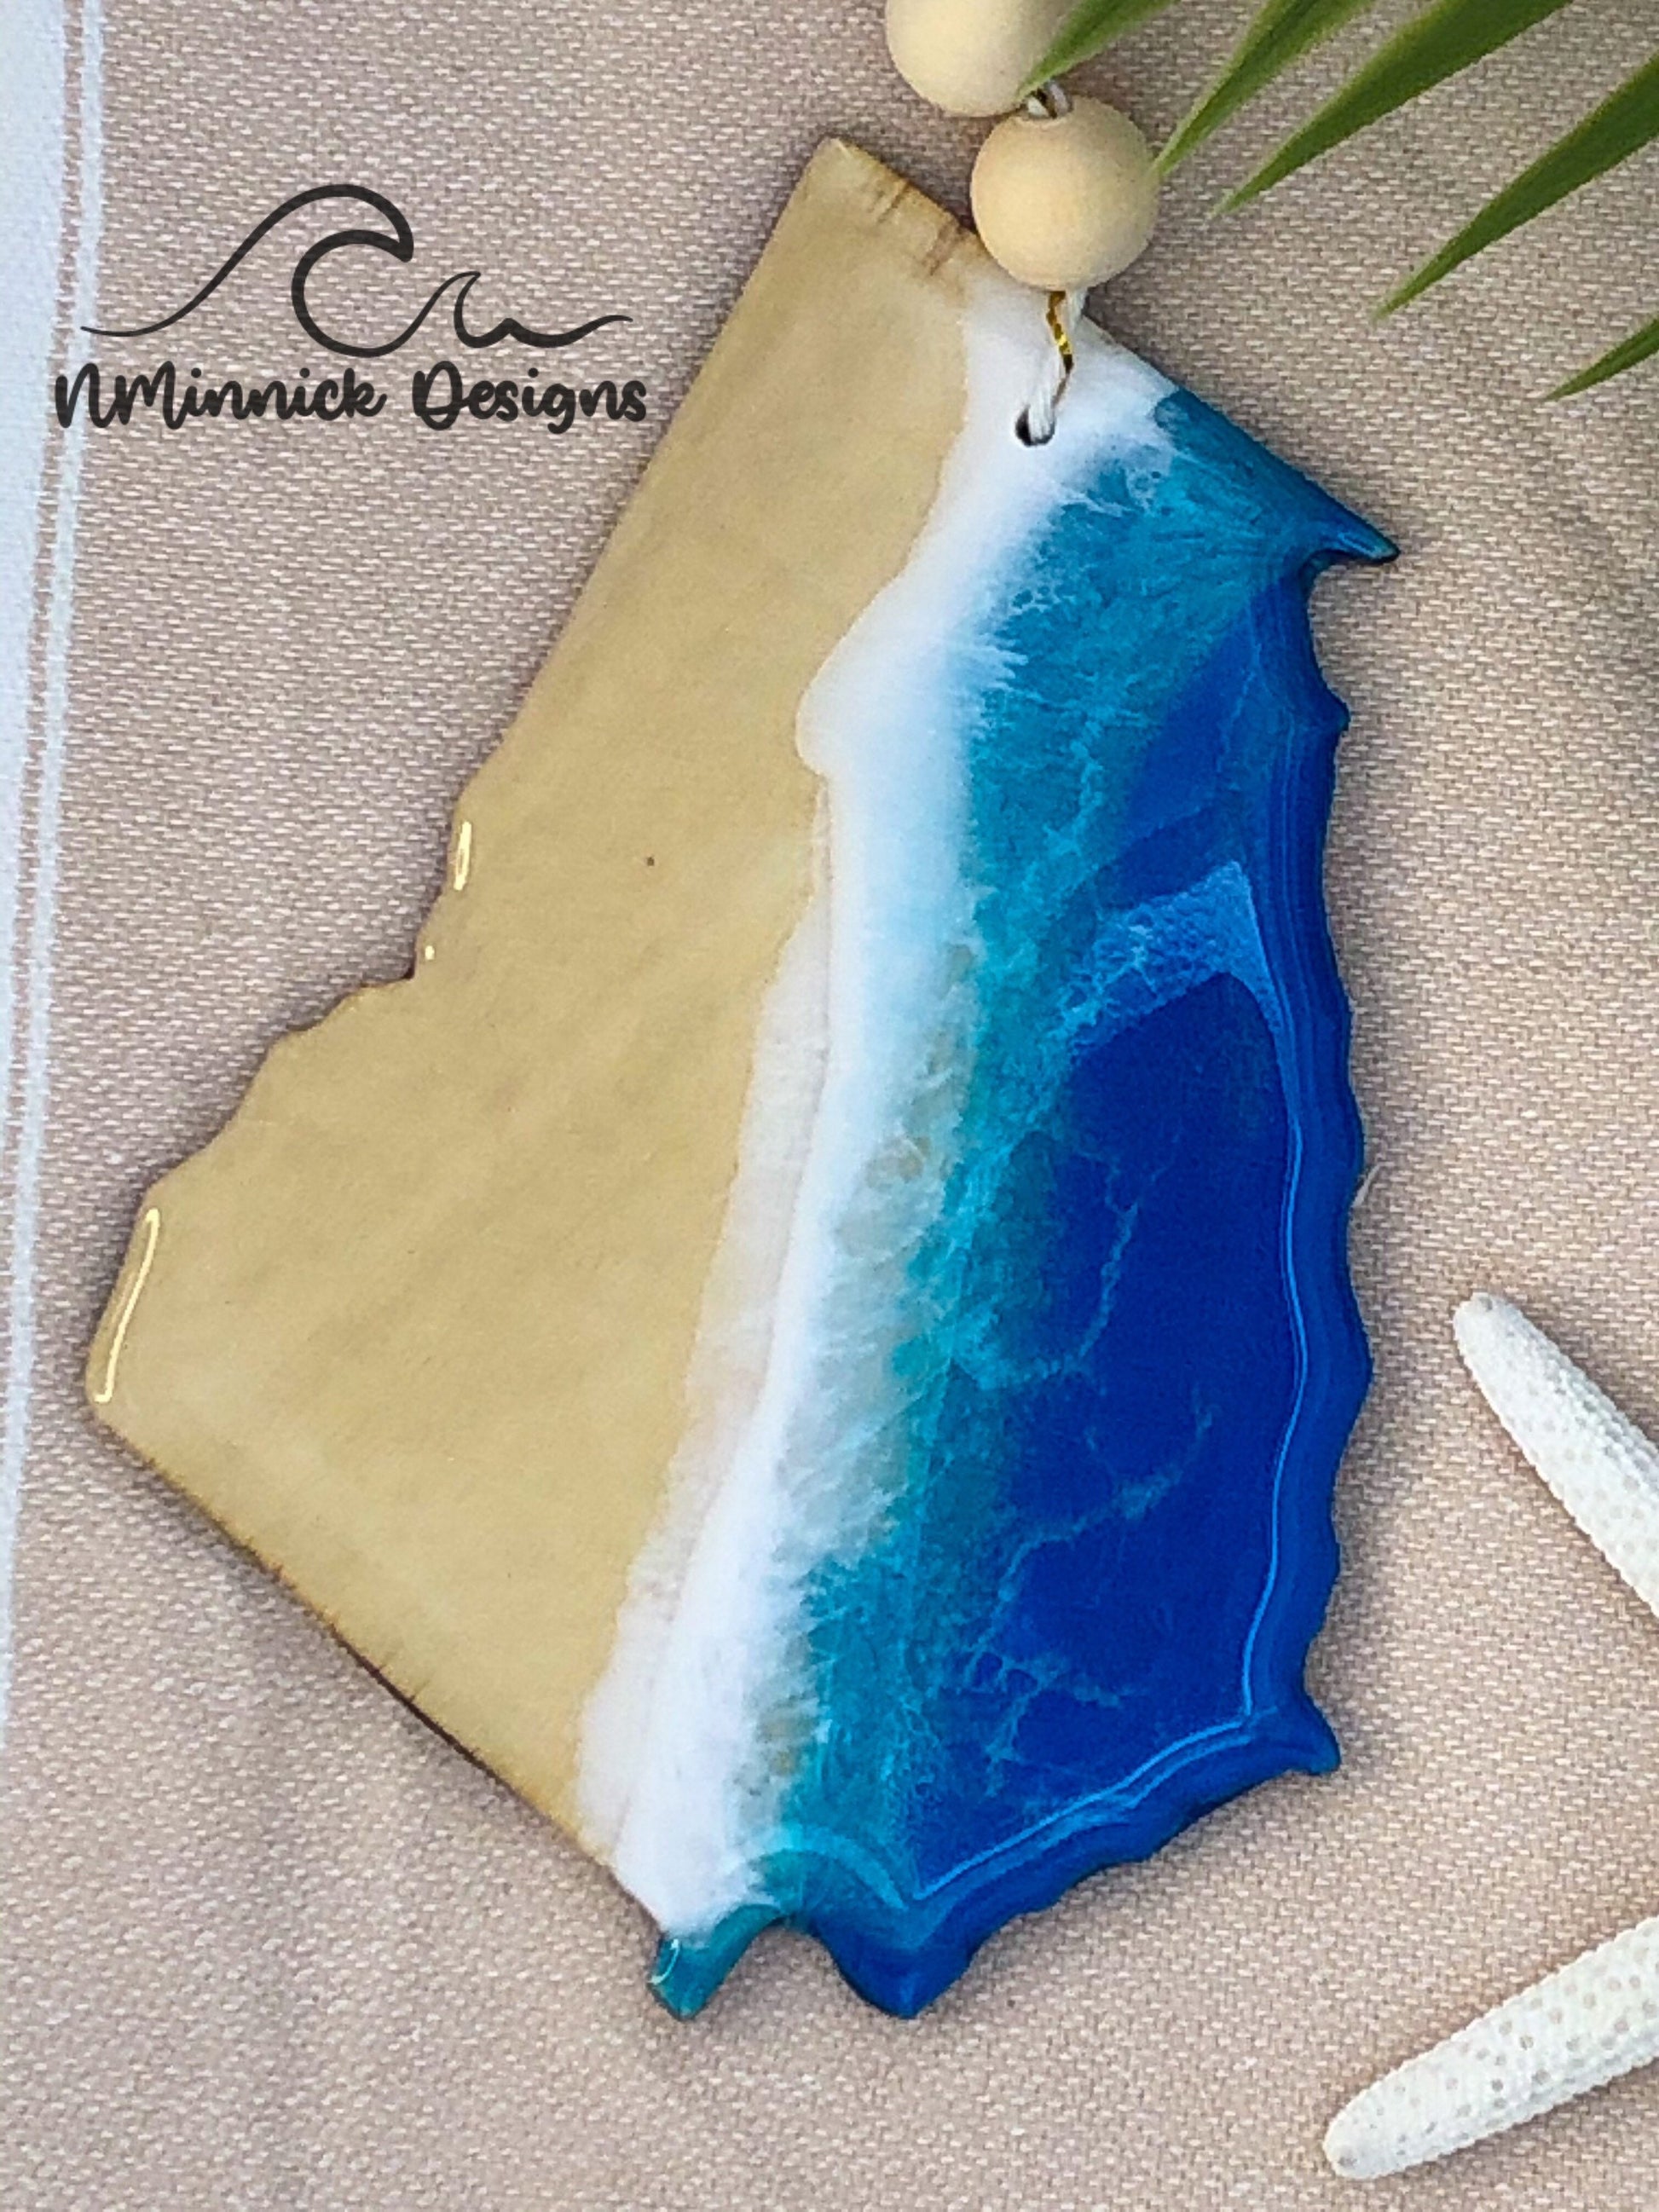 4.5 to 5 inch laser cut wood ornament in the shape of Georgia. Coastal ocean scene created with epoxy resin and blue, teal, and white mica pigments.